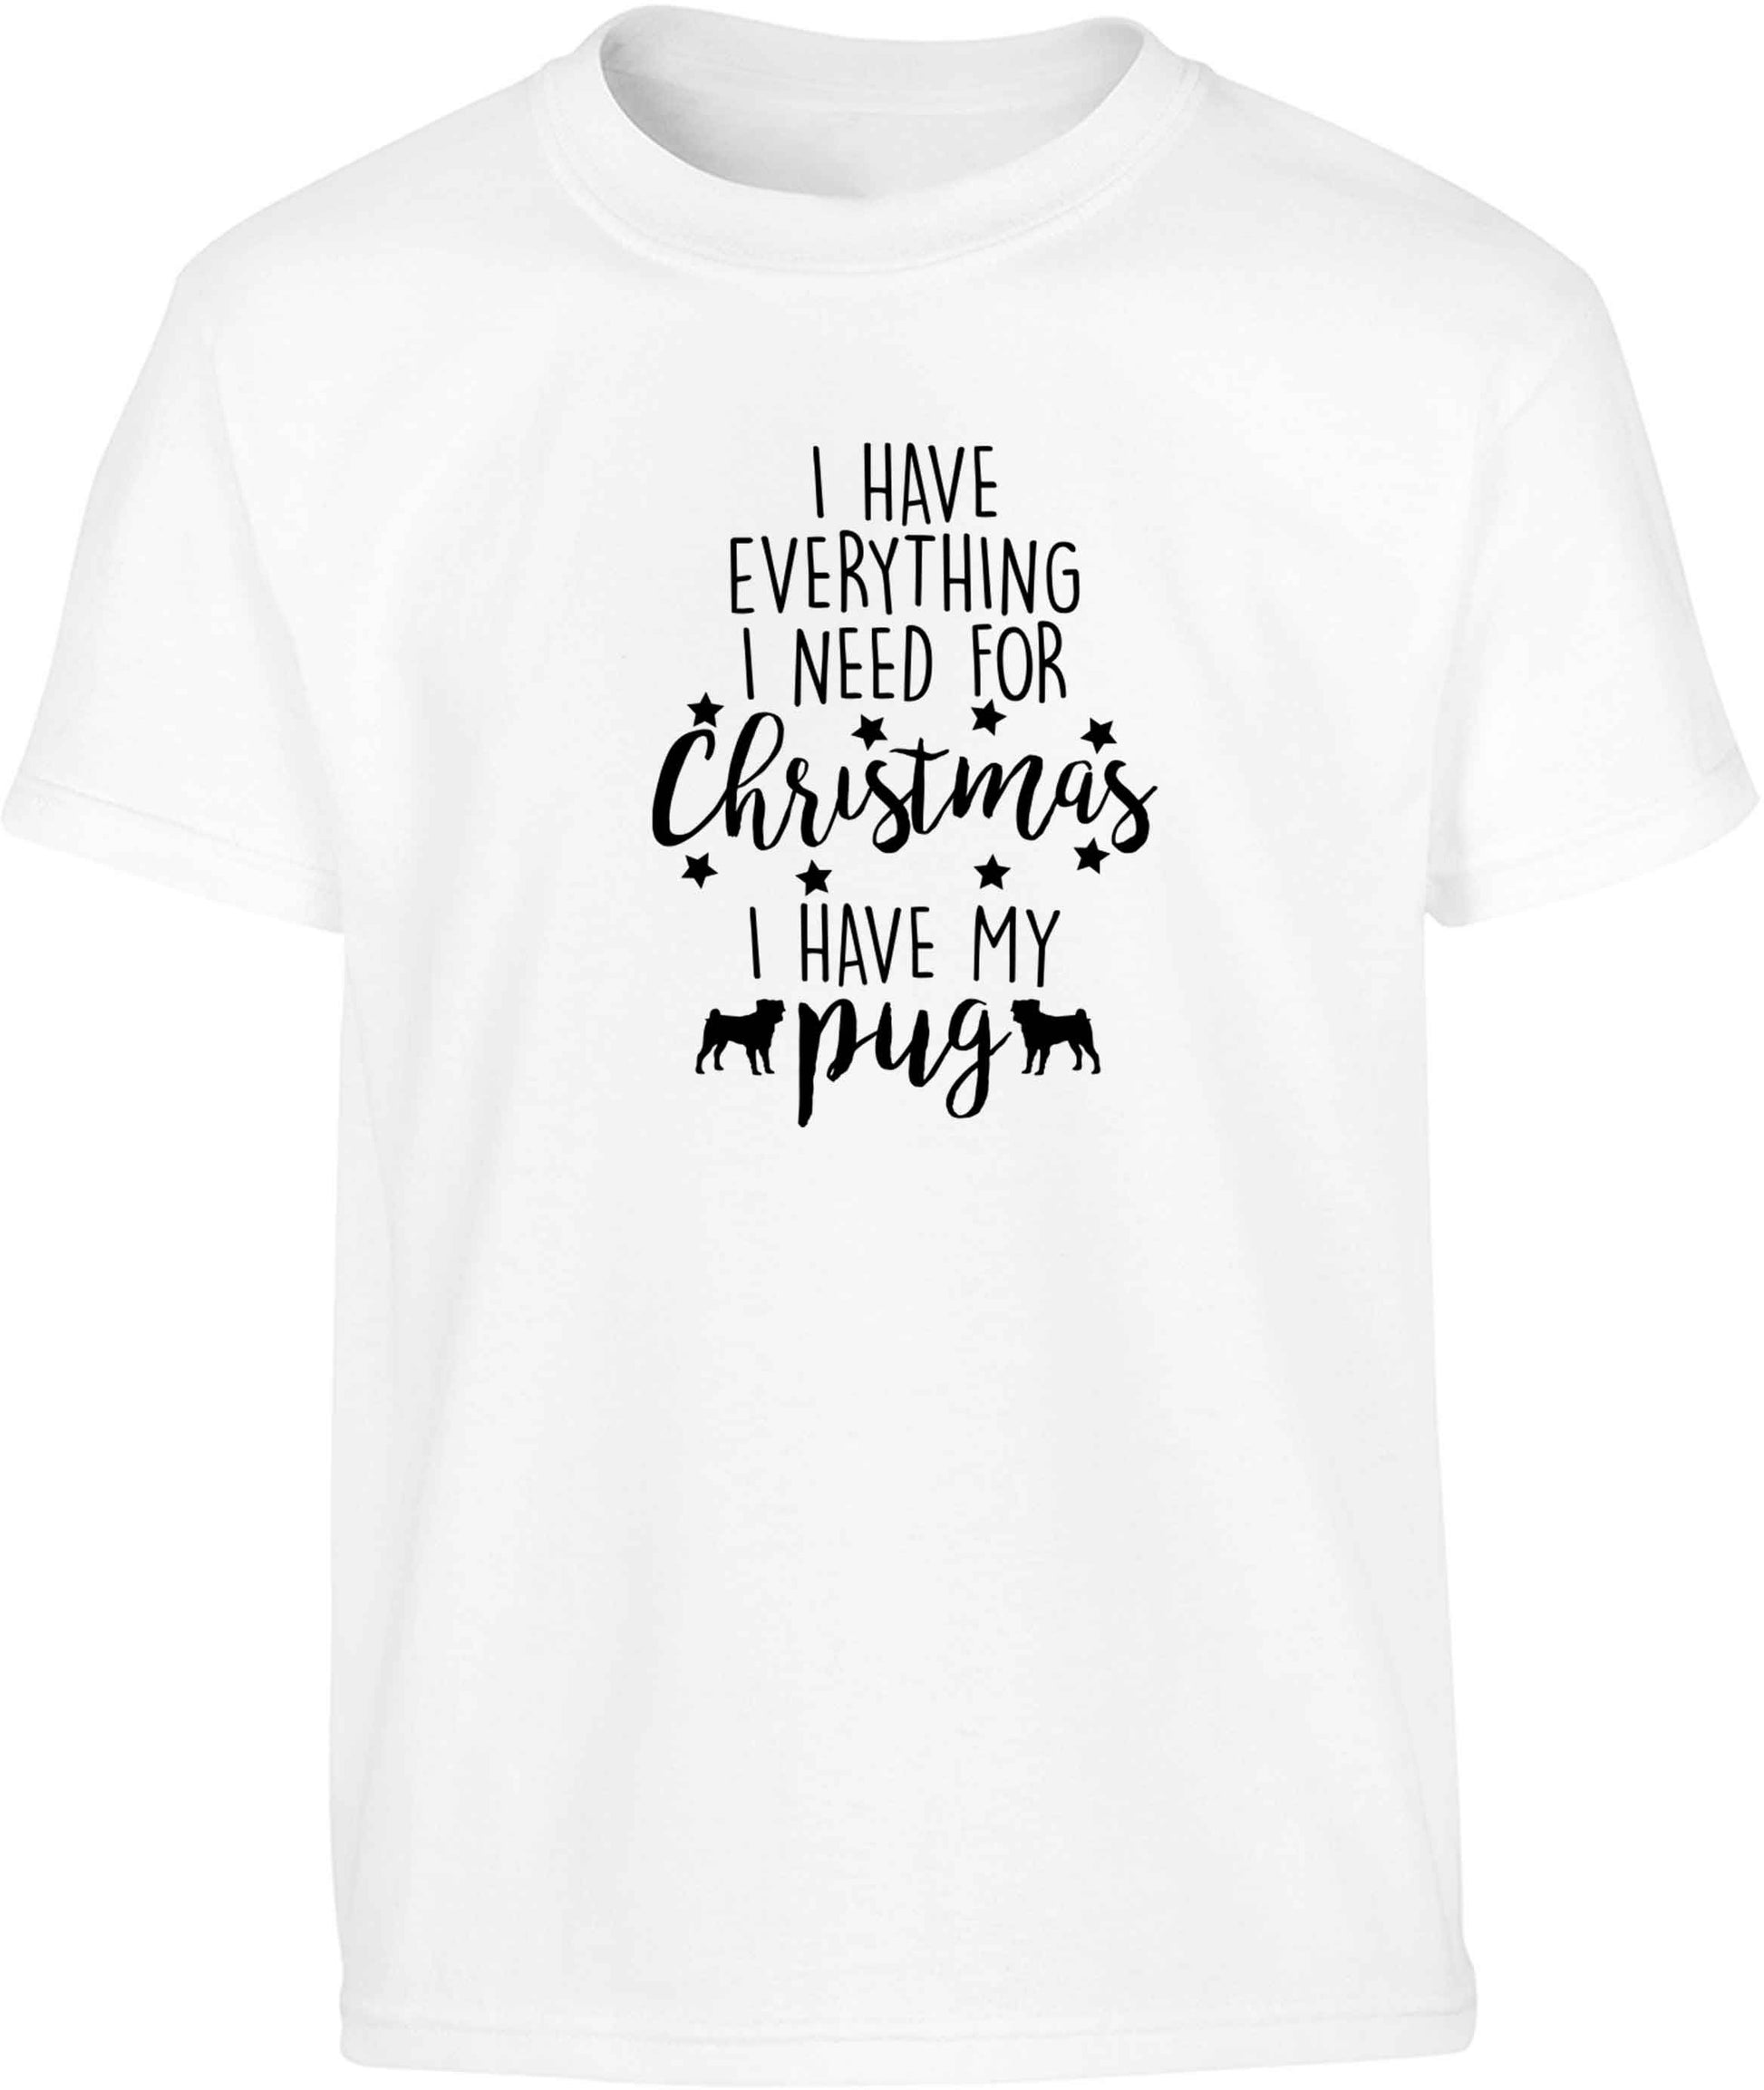 I have everything I need for Christmas I have my pug Children's white Tshirt 12-13 Years